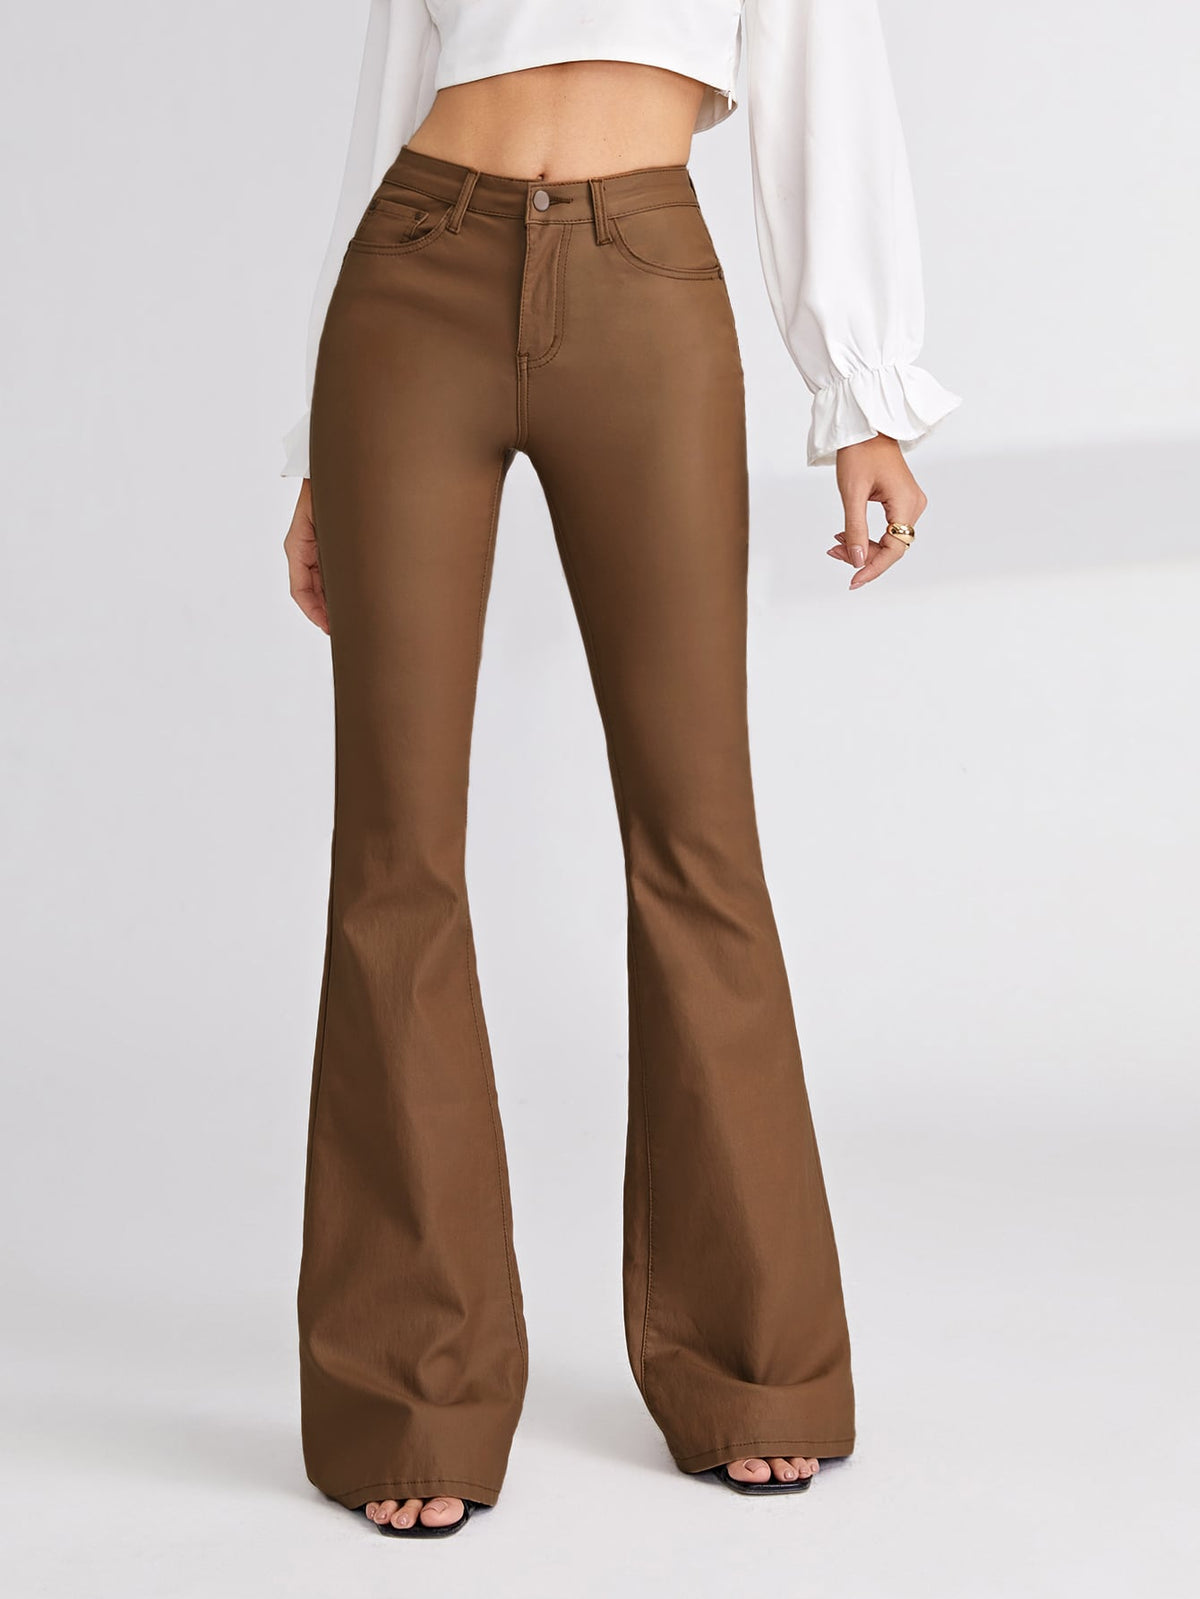 Black Jeans With Flare Leg - Brown / L